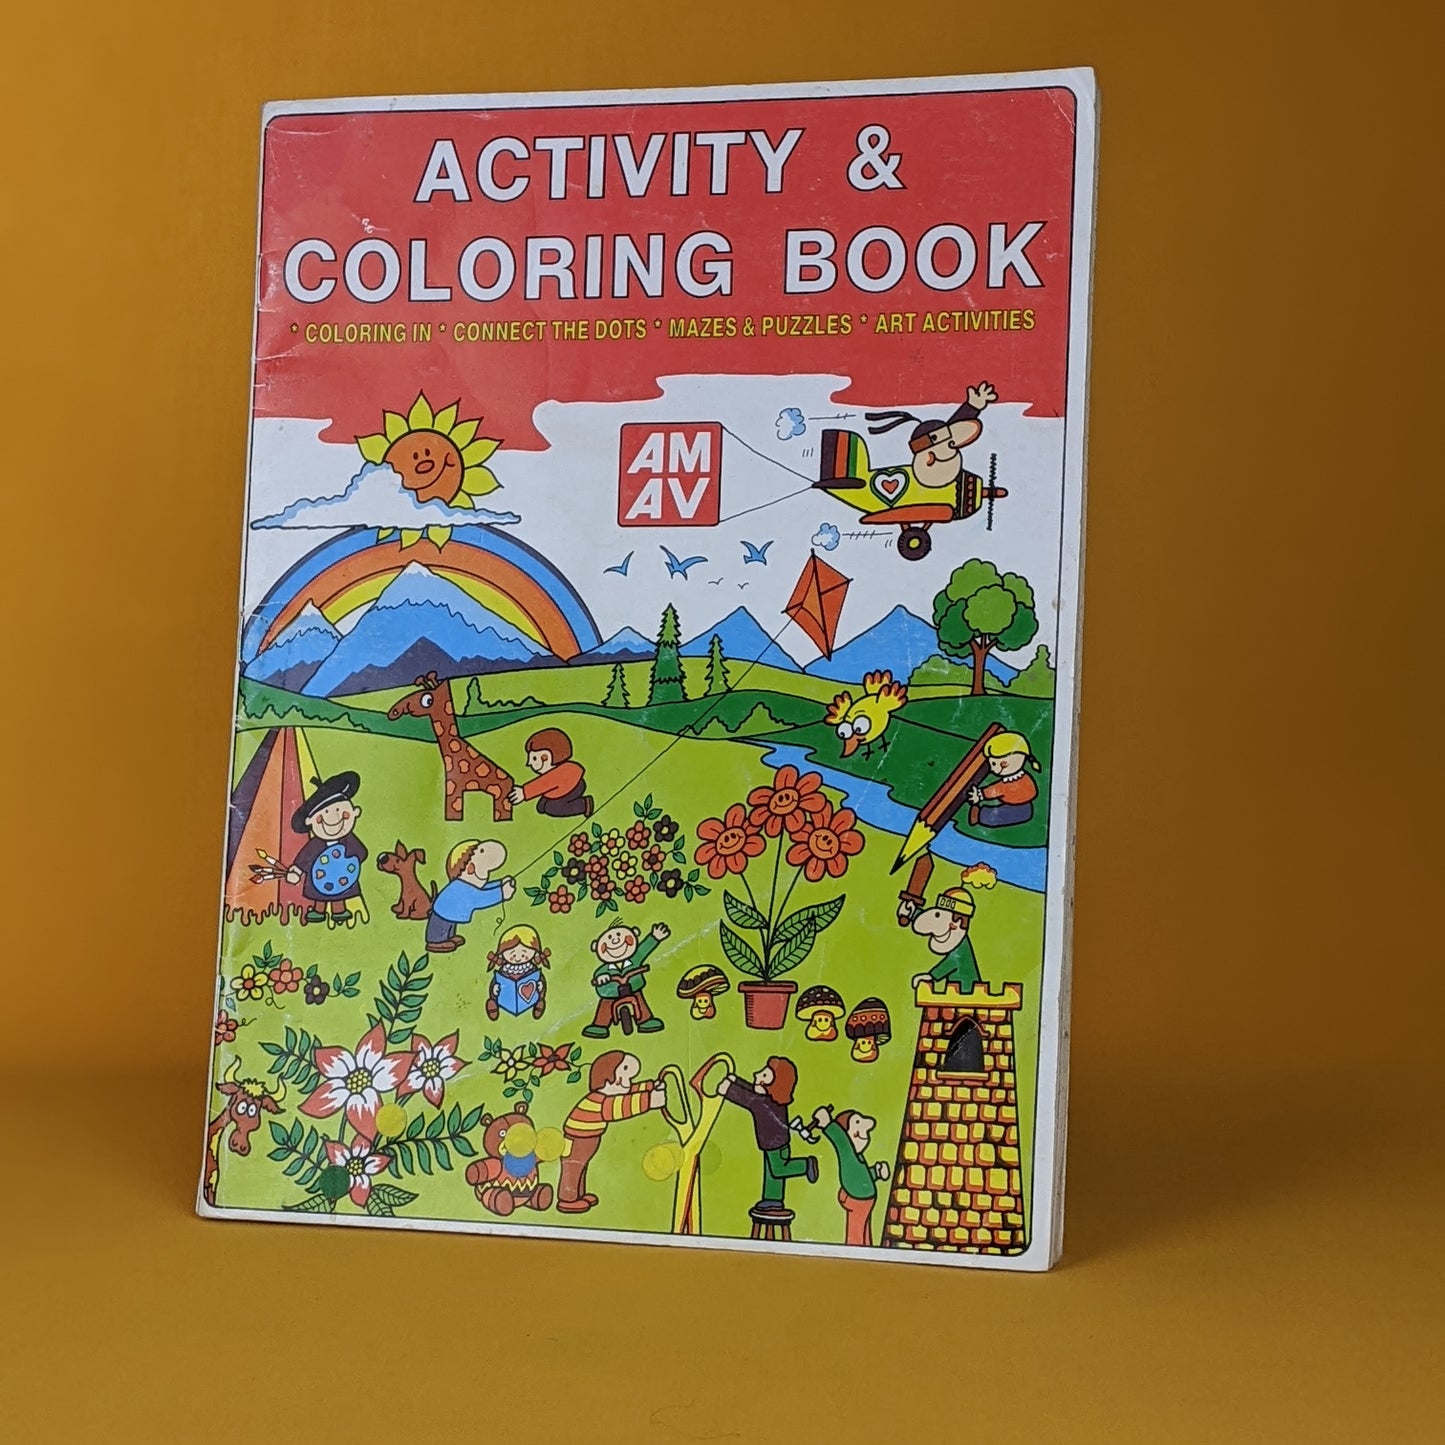 activity & colouring book by amav industries ltd.